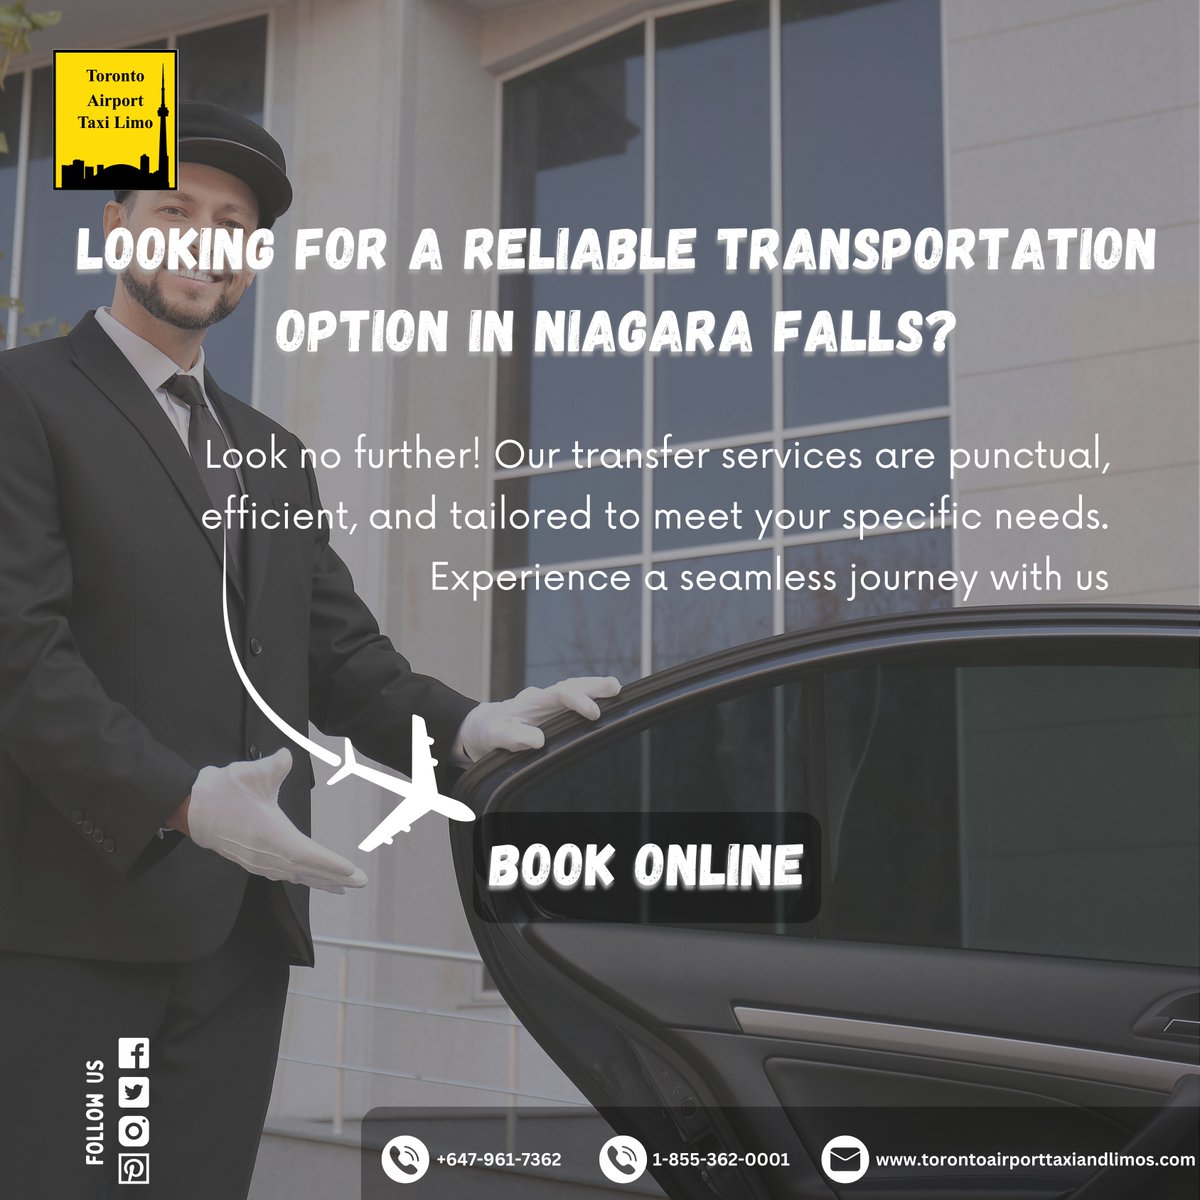 📍 Looking for a reliable transportation option in Niagara Falls? Look no further! 

🌐 Visit our website: torontoairporttaxiandlimos.com 🌐
.
#NiagaraFallsTransportation #ReliableService #SeamlessJourney #AirportTransfers #TravelEasy #TransportationSolutions #PunctualityGuaranteed